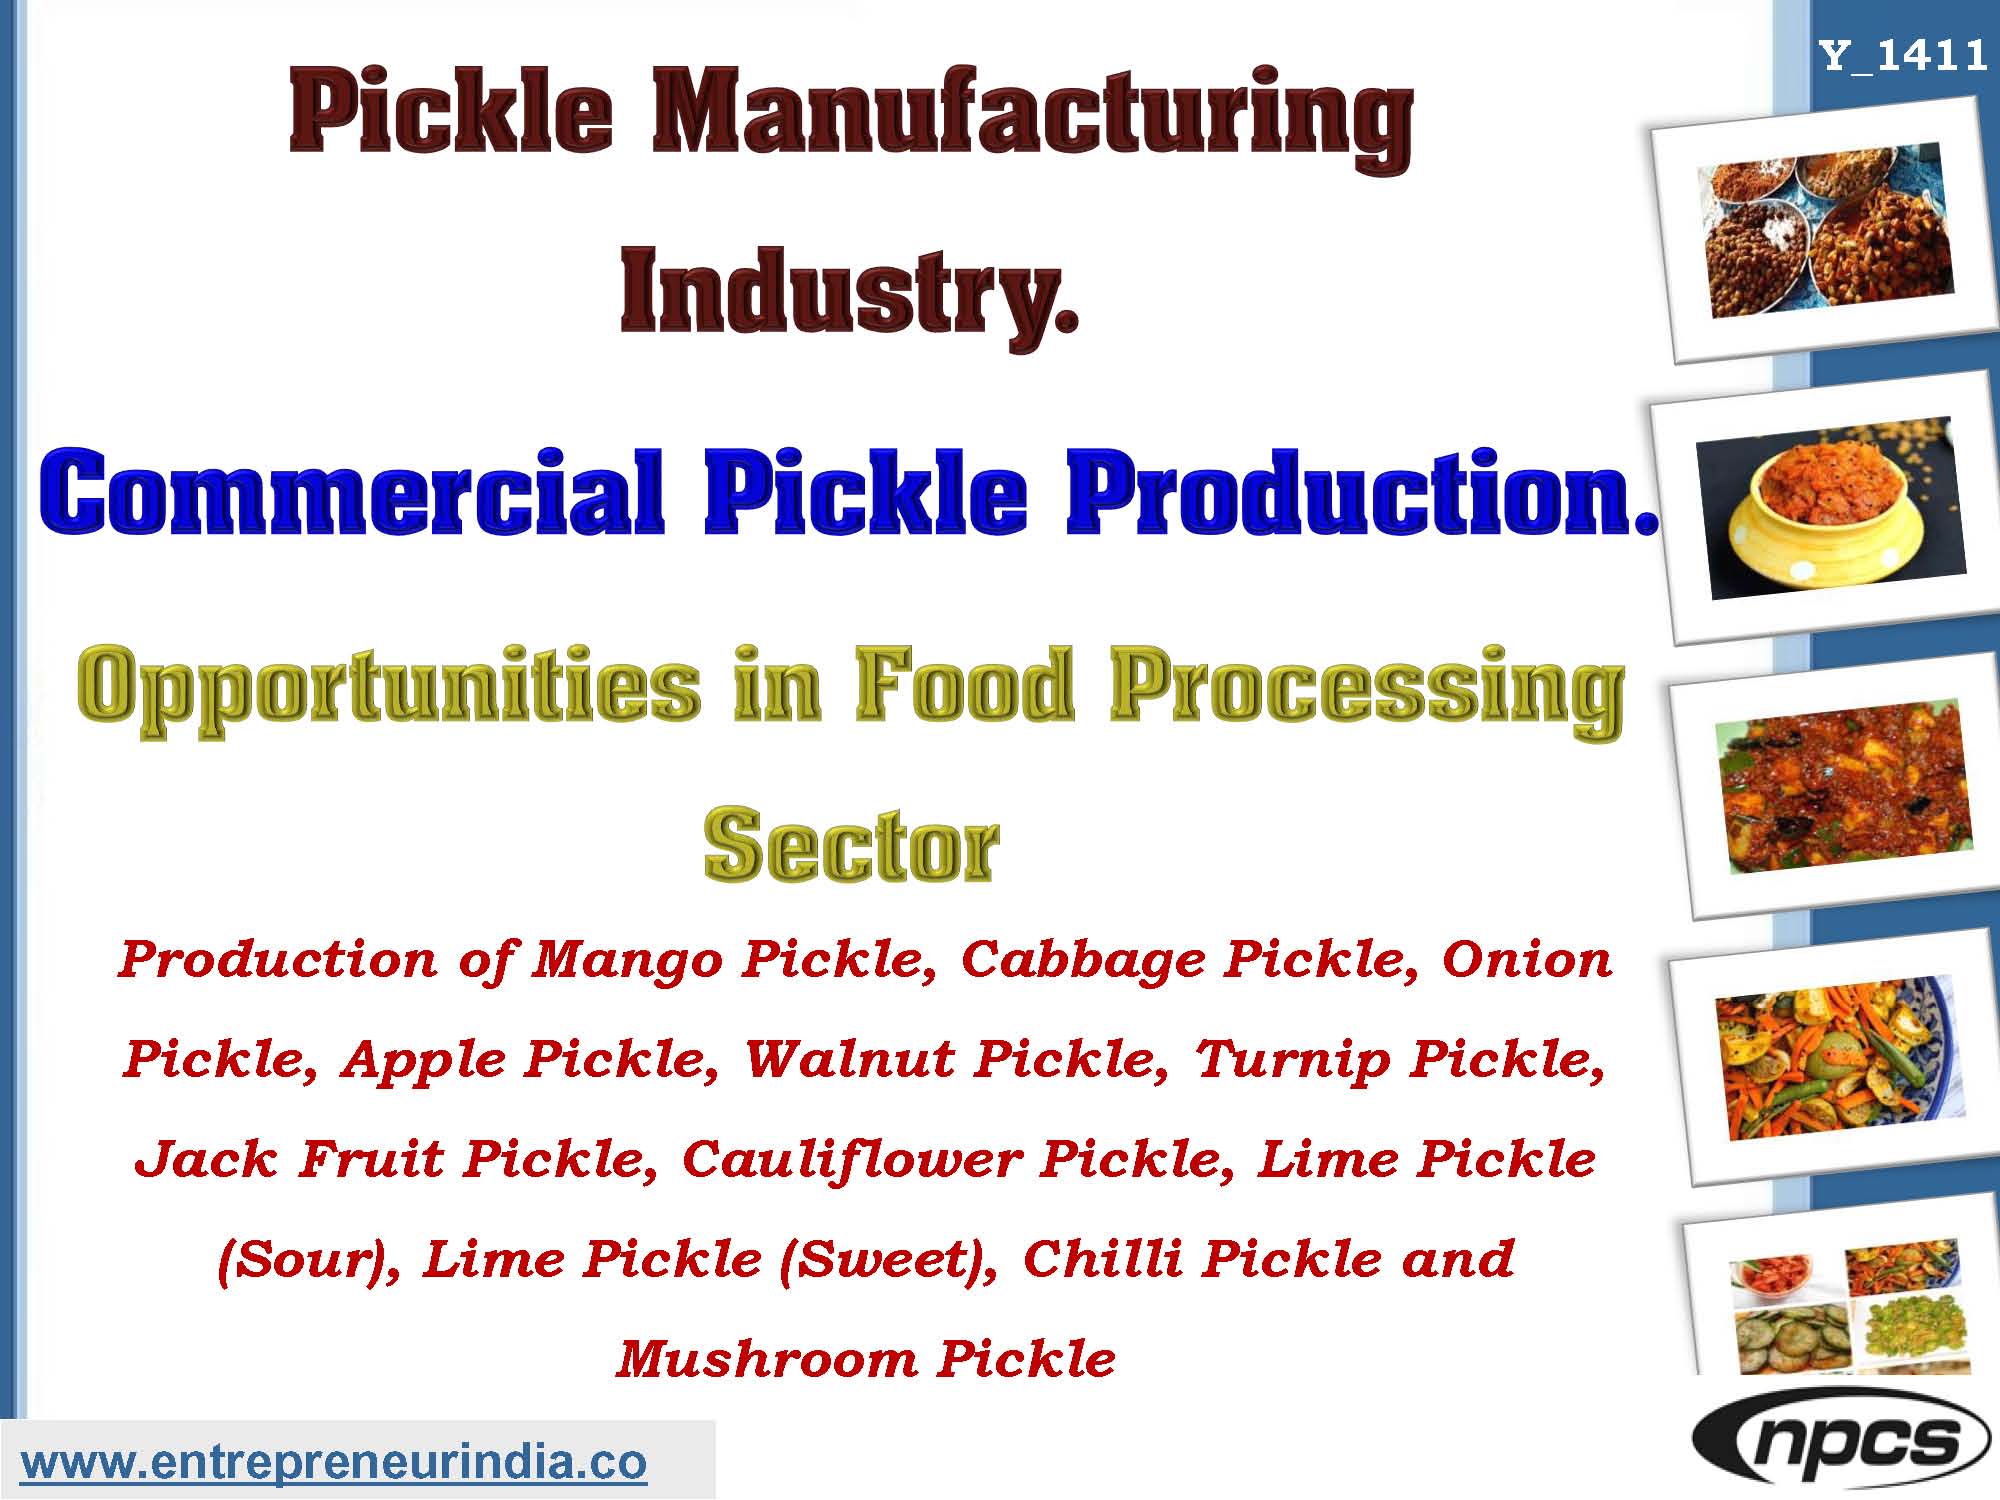 business plan for pickle industry